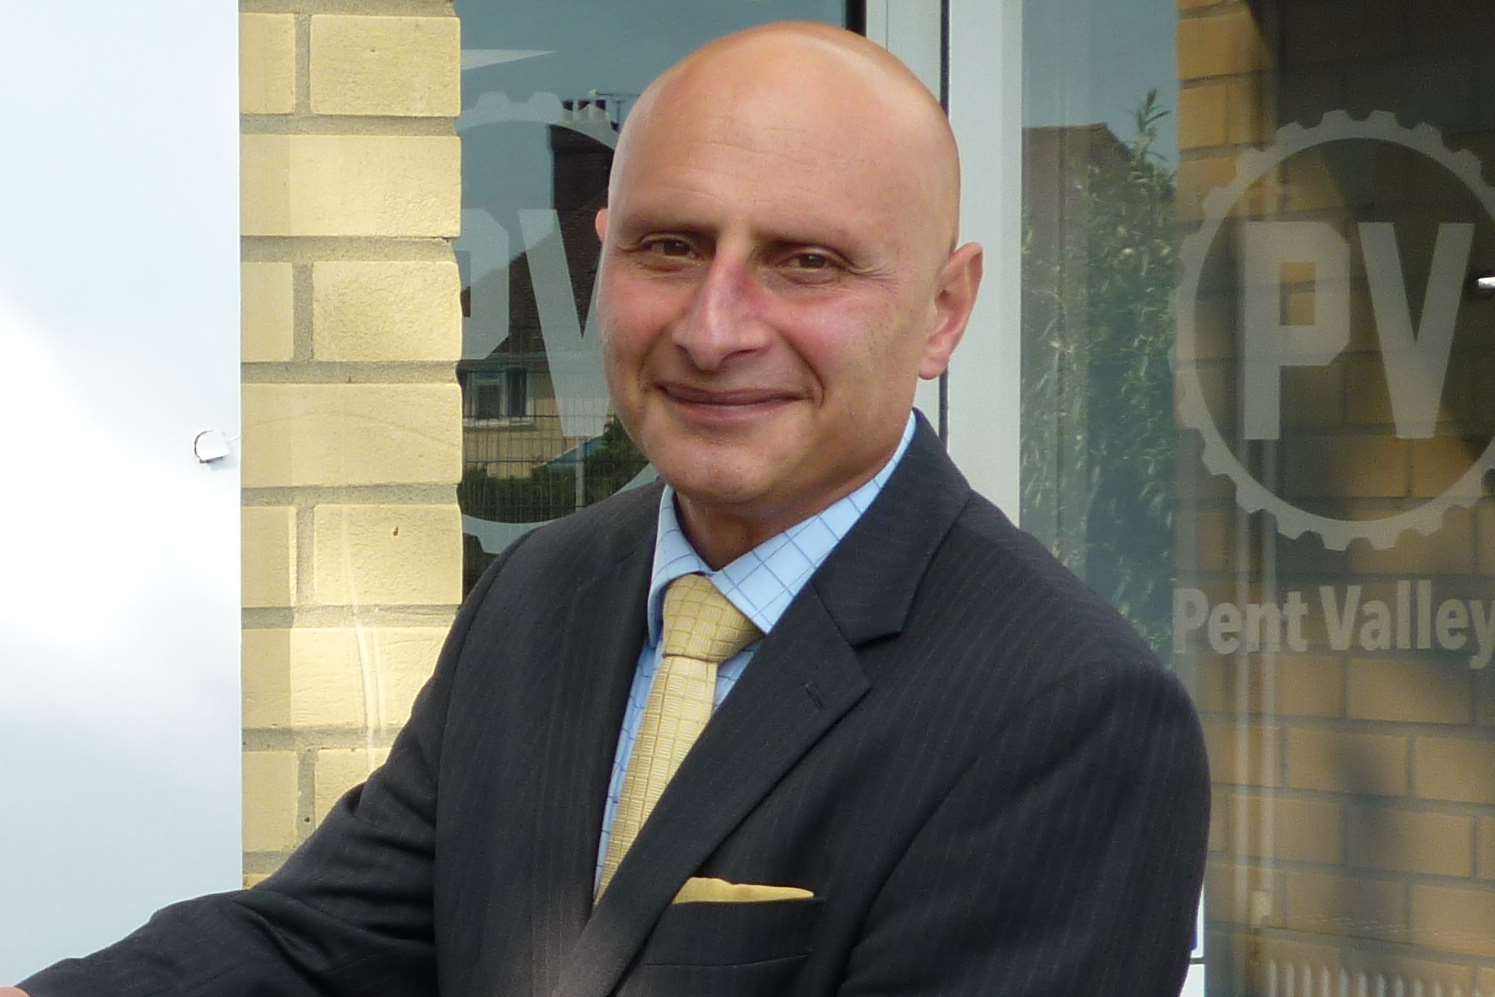 Pent Valley head teacher Mario Citro decided not to return after Mr Whitcombe's appointment